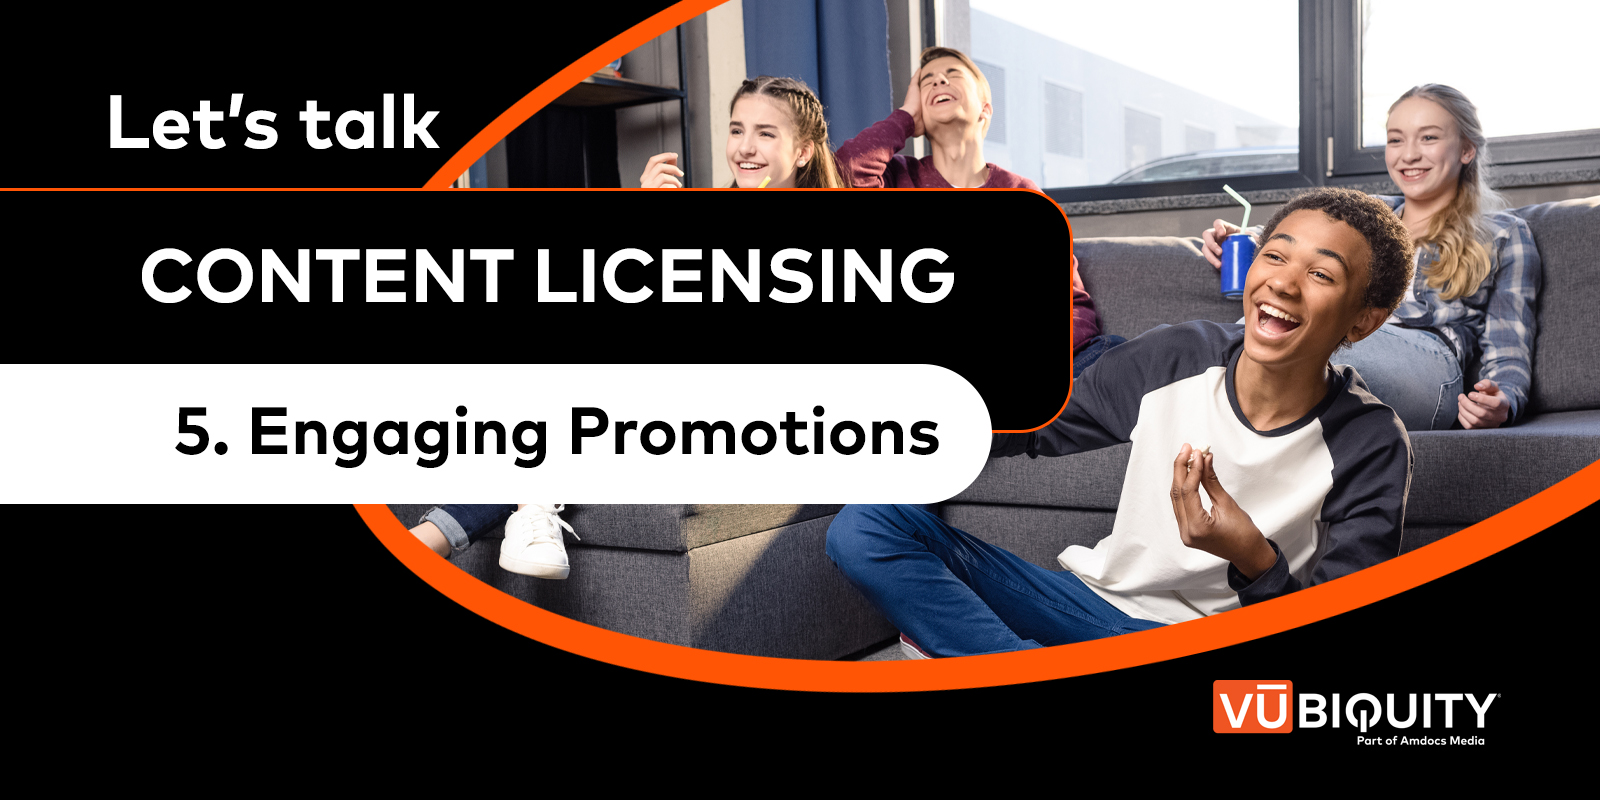 Content Licensing - Engaging Promotions